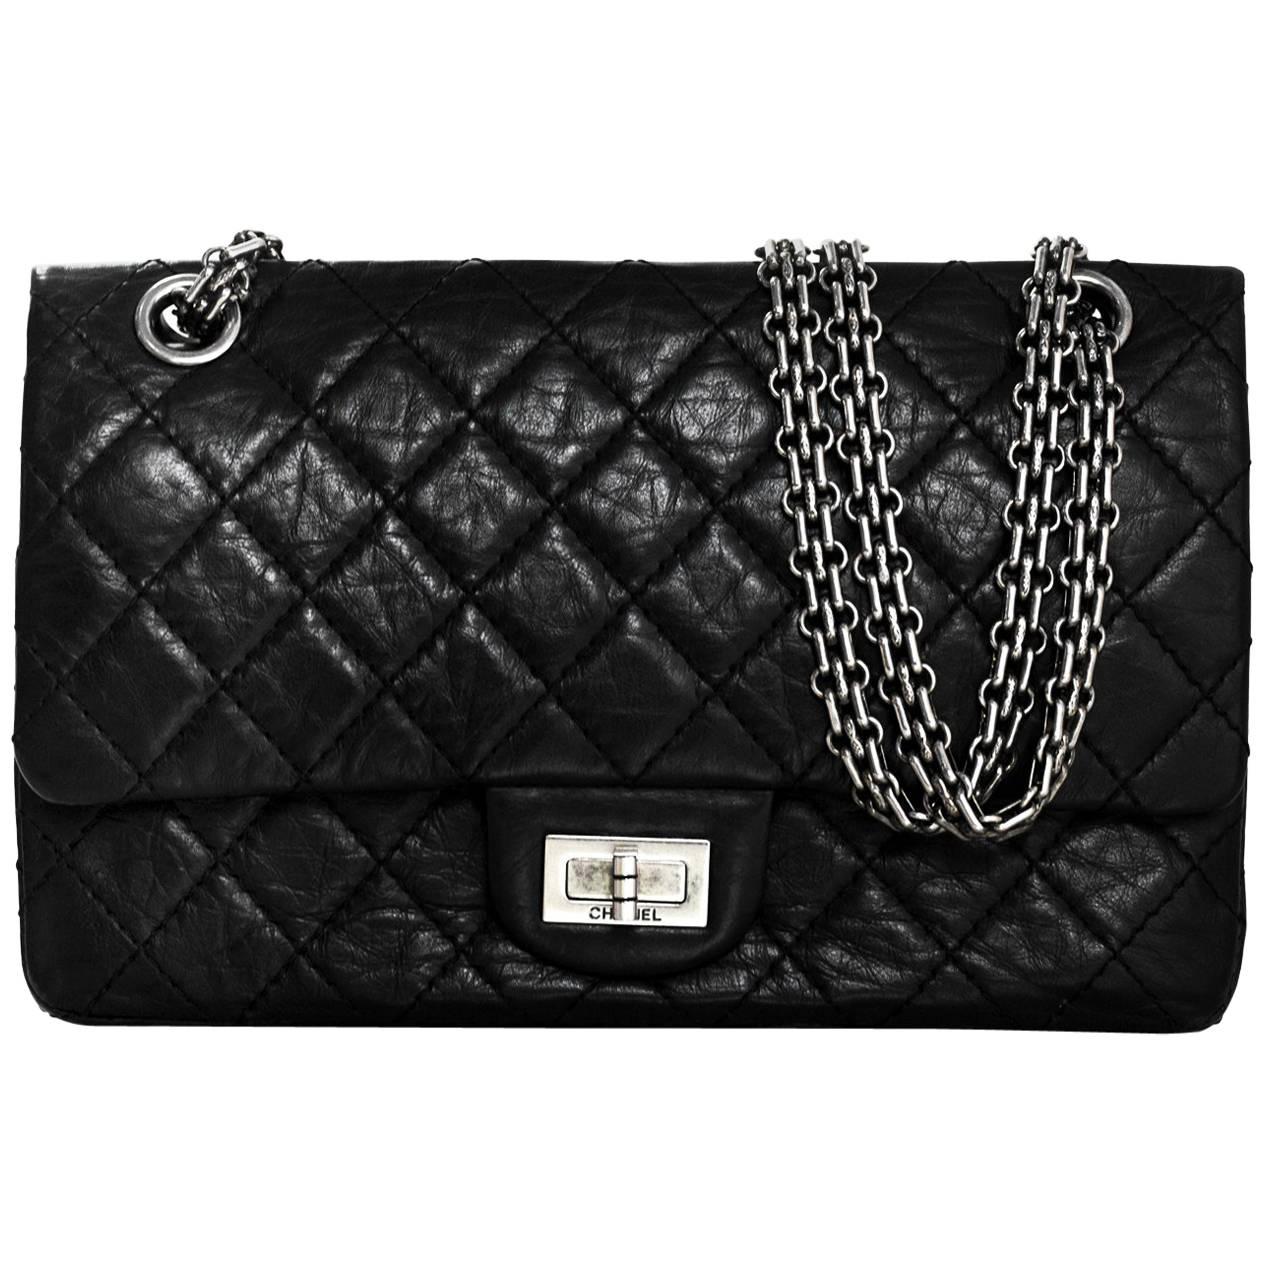 Chanel Black Distressed Calfskin Reissue 2.55 Double Flap Bag with DB ...